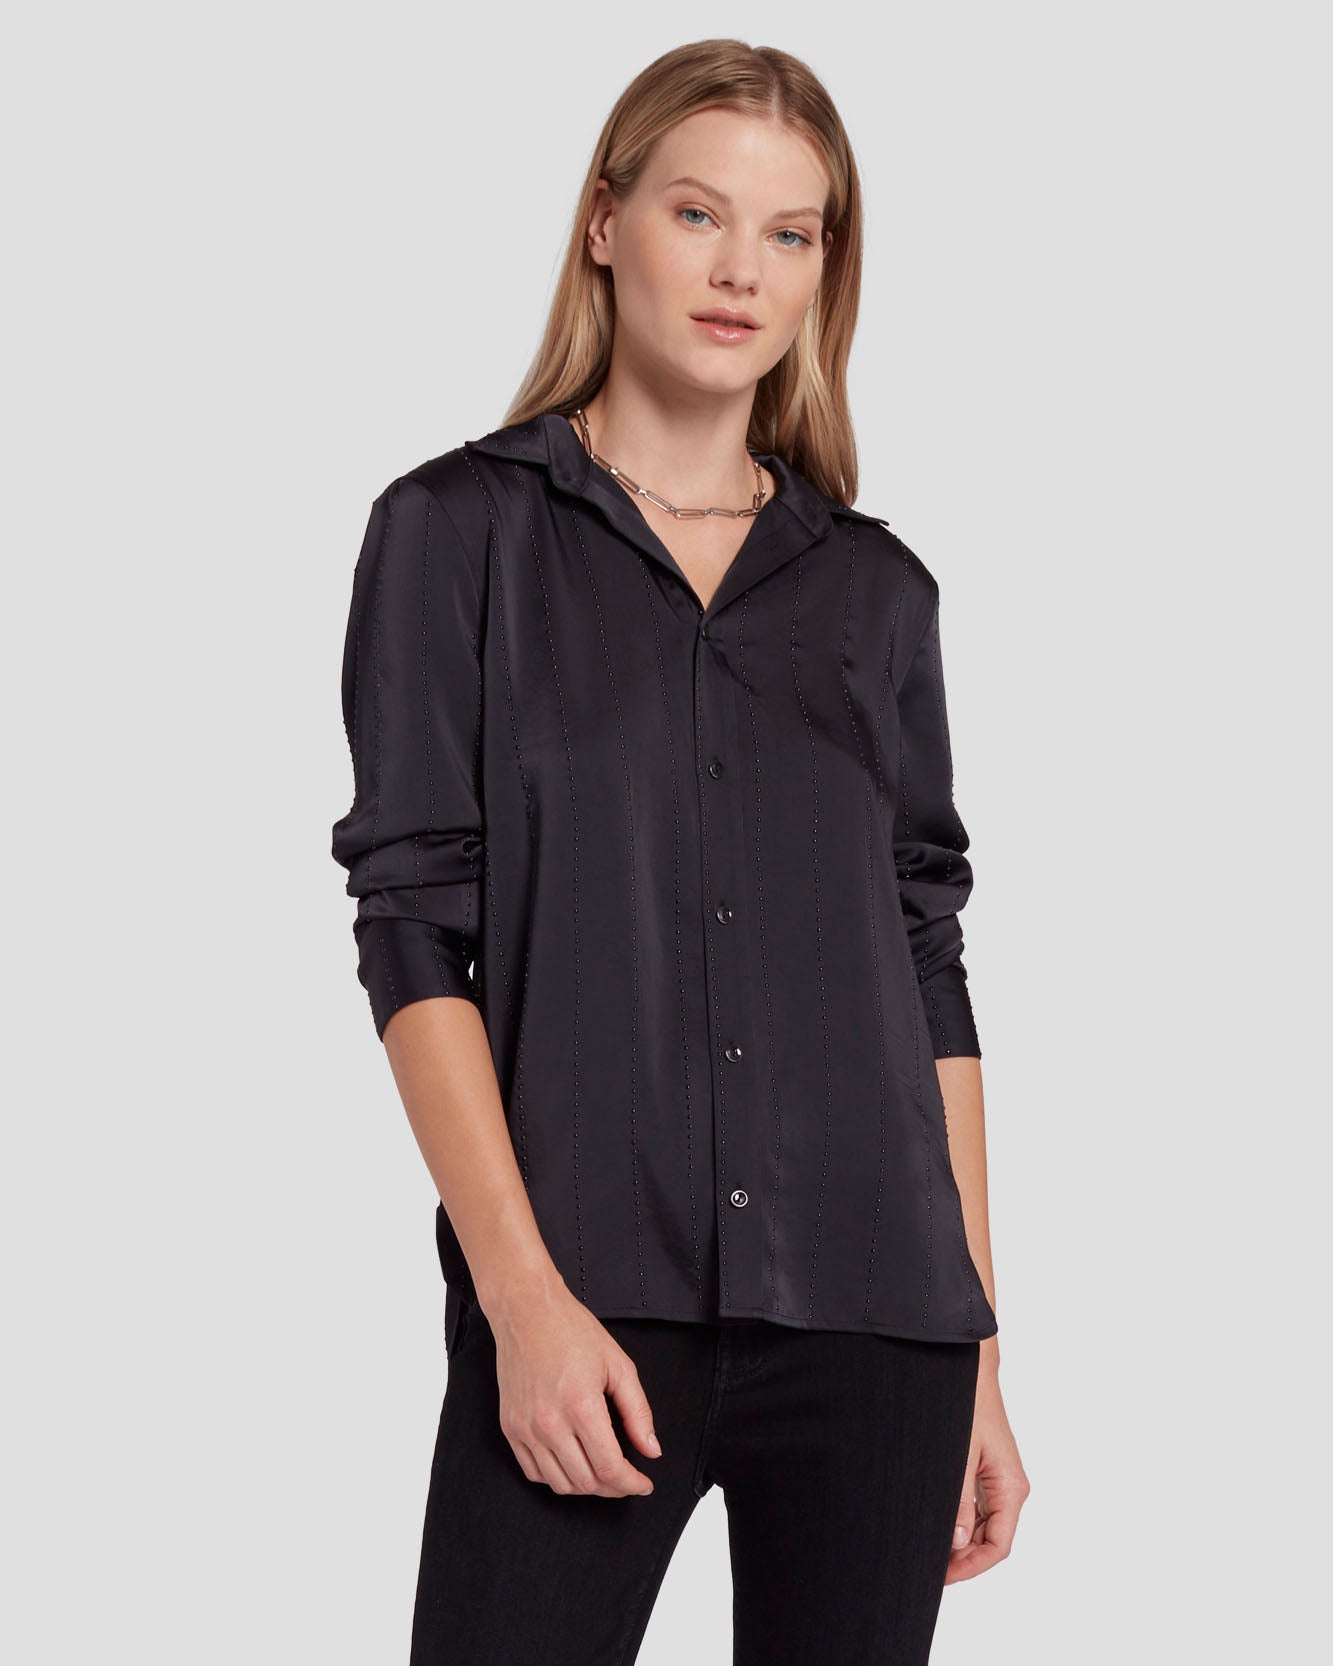 Embellished Satin Button-Up Shirt in Black | 7 For All Mankind